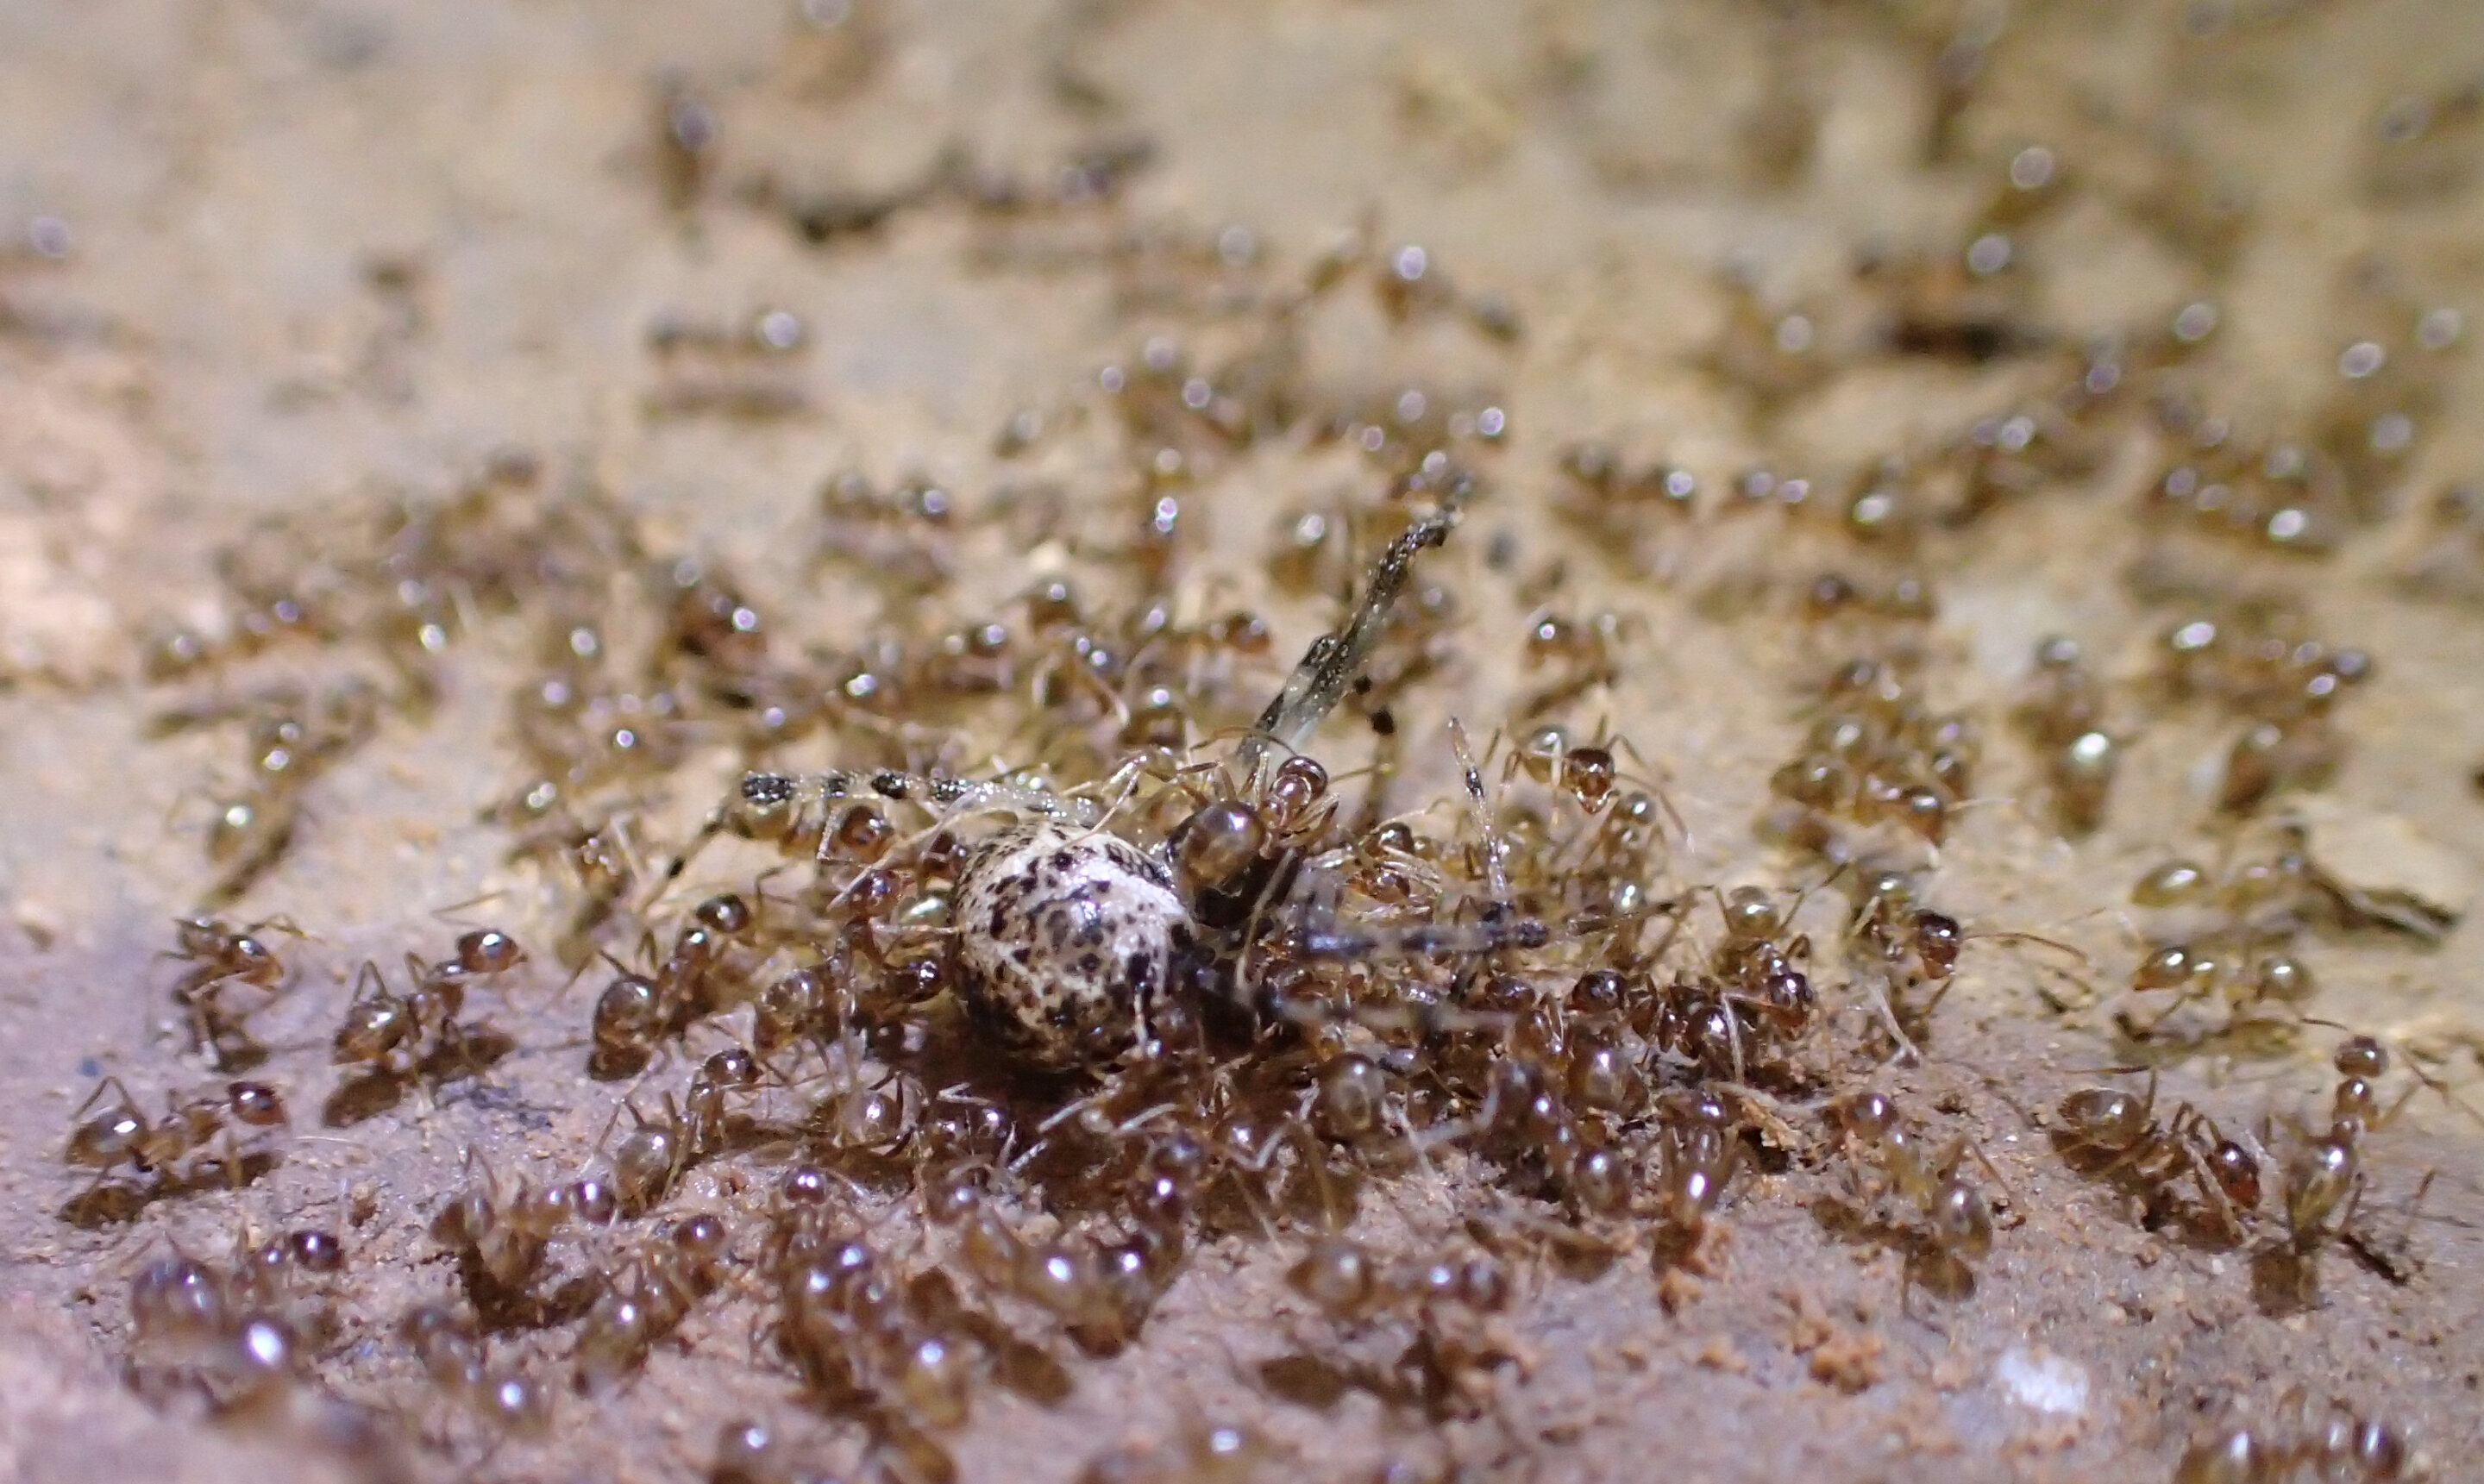 HOW TO TREAT FOR TAWNY CRAZY ANTS